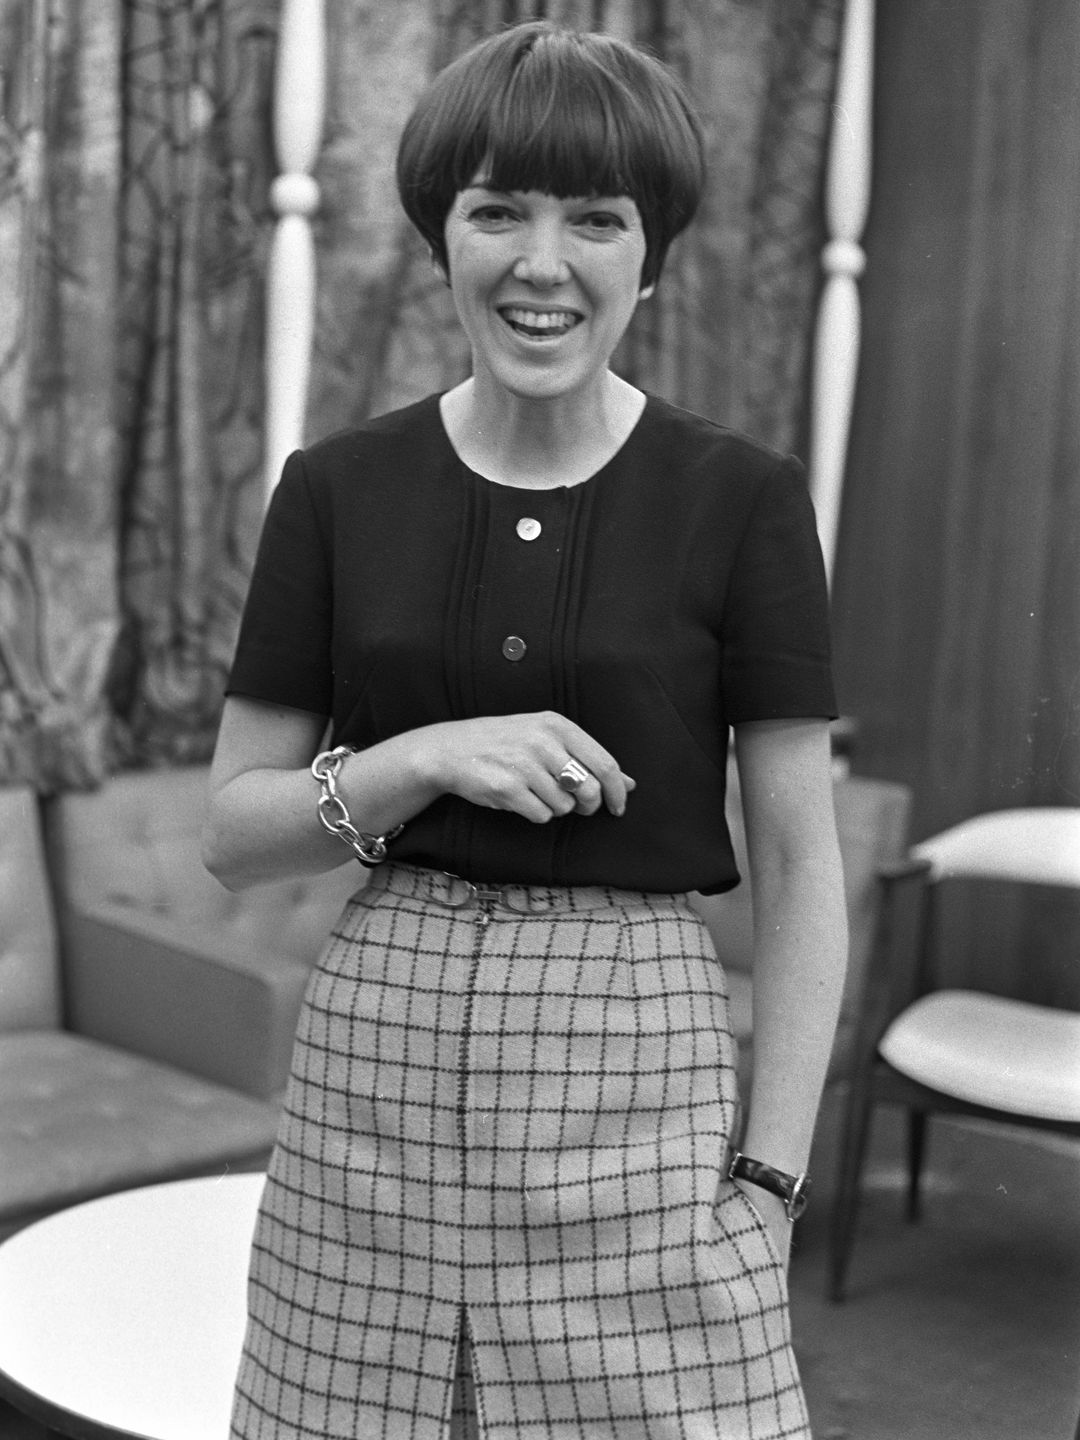 British fashion designer Mary Quant wearing a plaid skirt (Photo by Fairchild Archive/Penske Media via Getty Images)